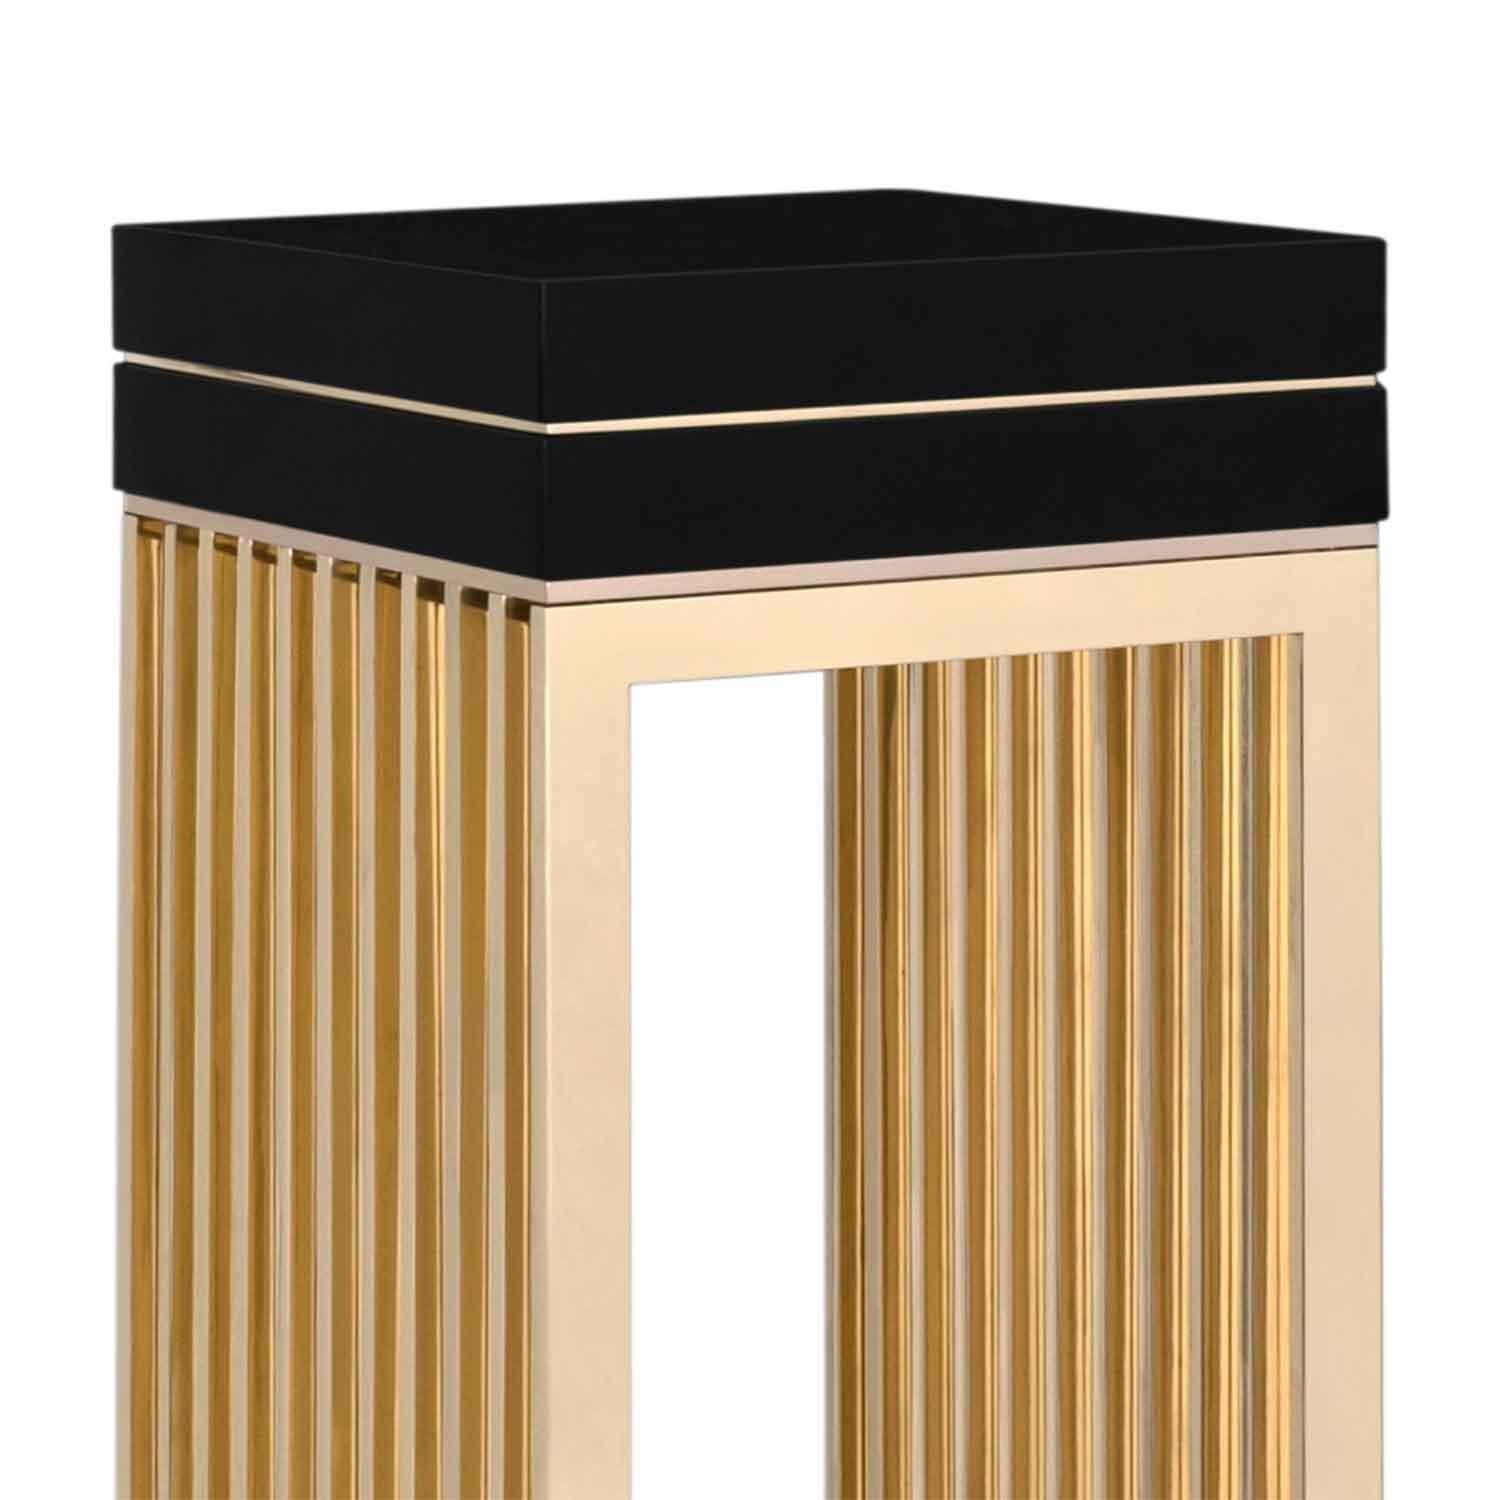 Pedestal fall with black lacquered wooden
top and with polished solid brass base.